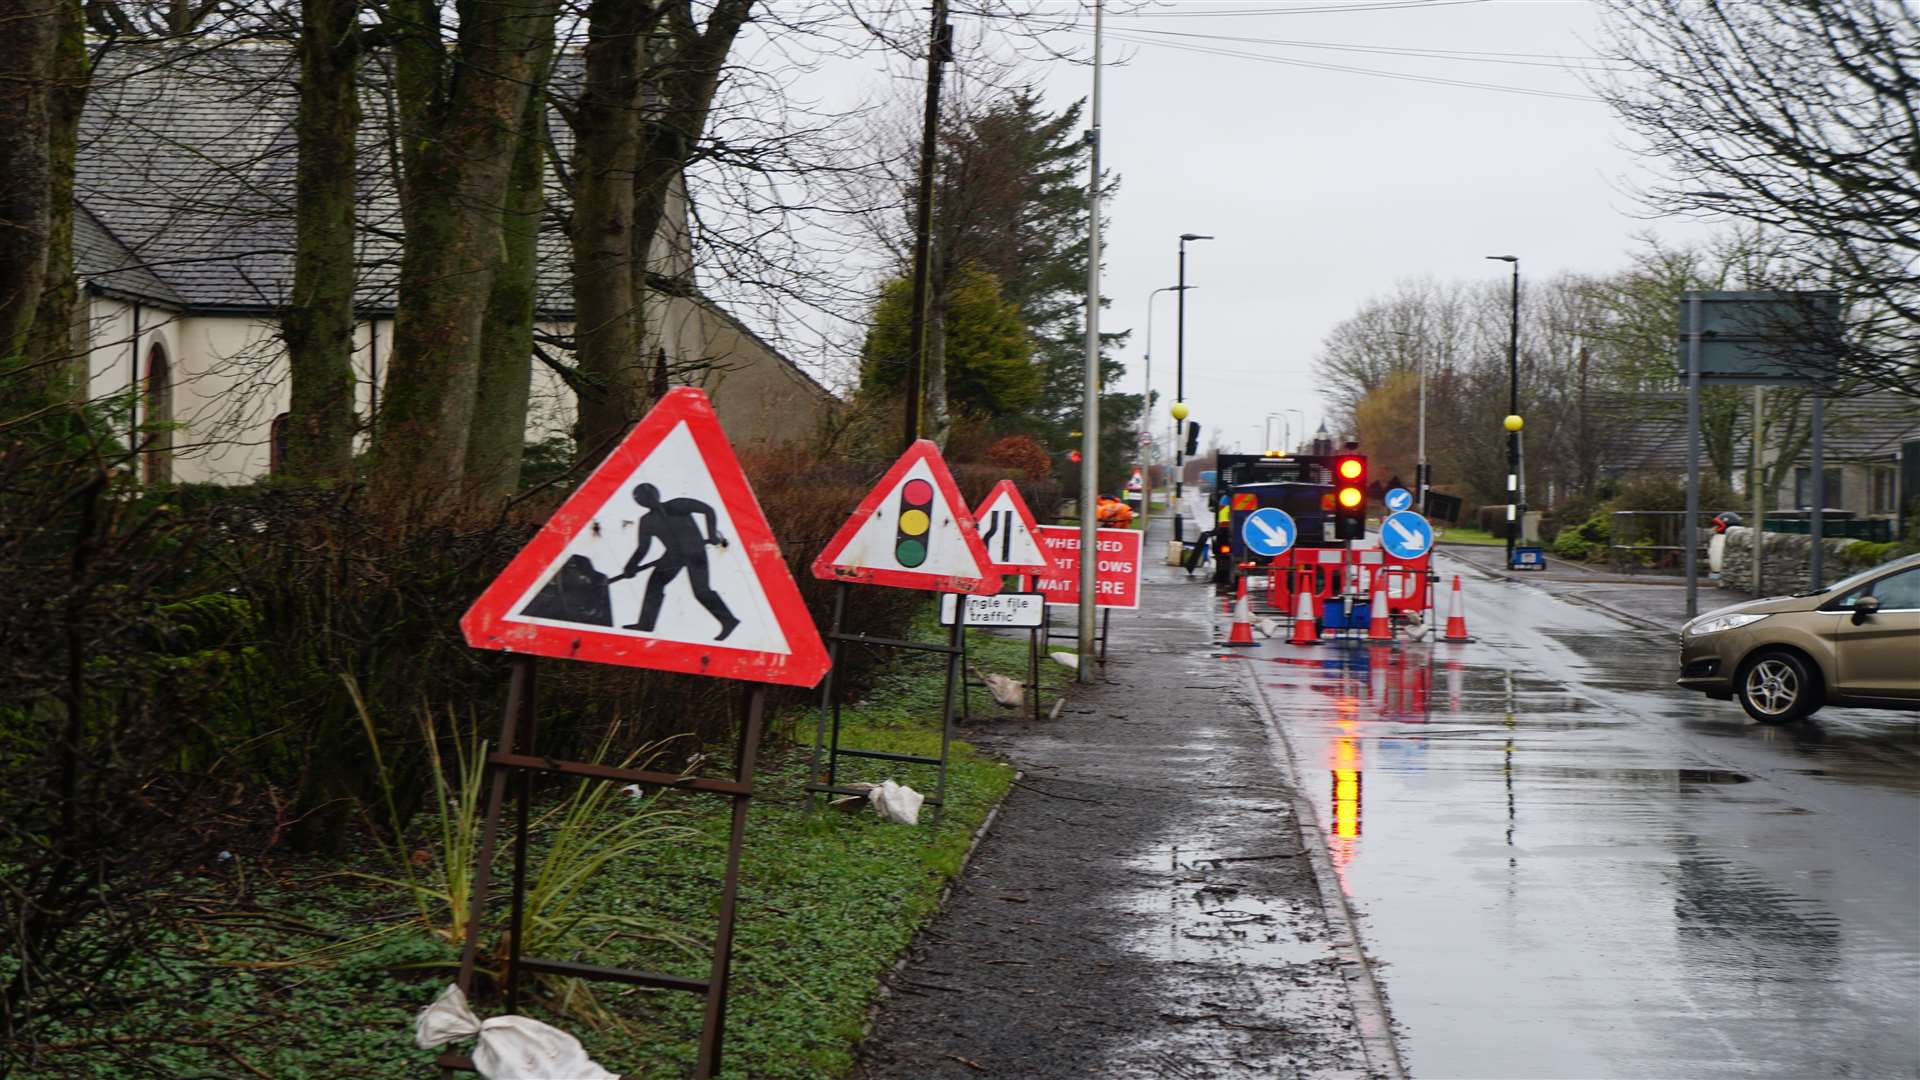 Temporary traffic lights set up in Watten as work gets underway this morning. Picture: DGS